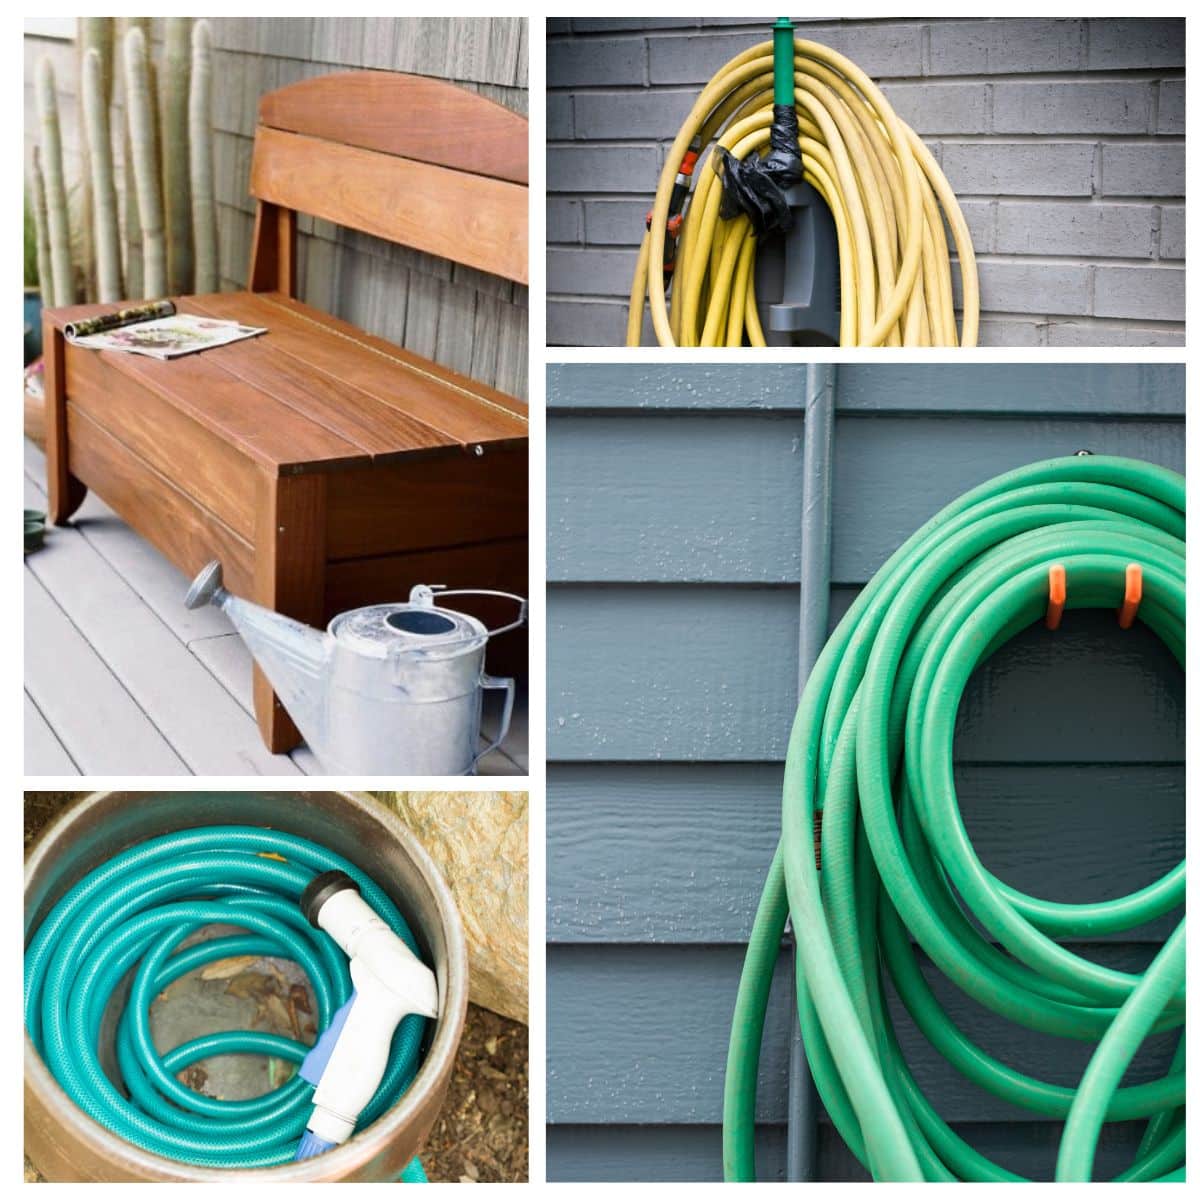 How to Store a Garden Hose: 9 Easy Solutions